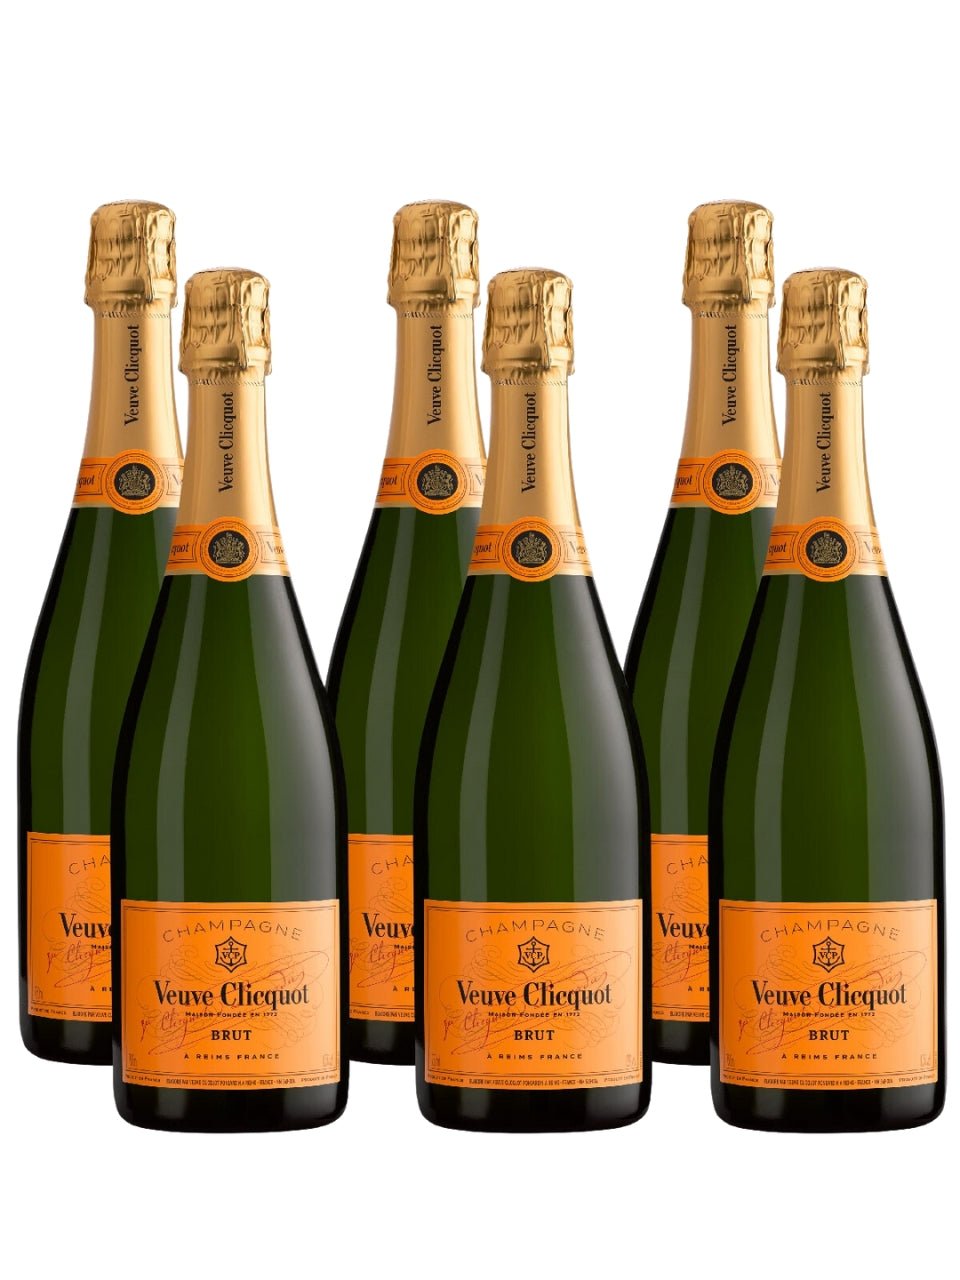 Veuve Clicquot Yellow Label Six-Bottle Case | Exquisite Wine & Alcohol Gift Delivery Toronto Canada | Vyno